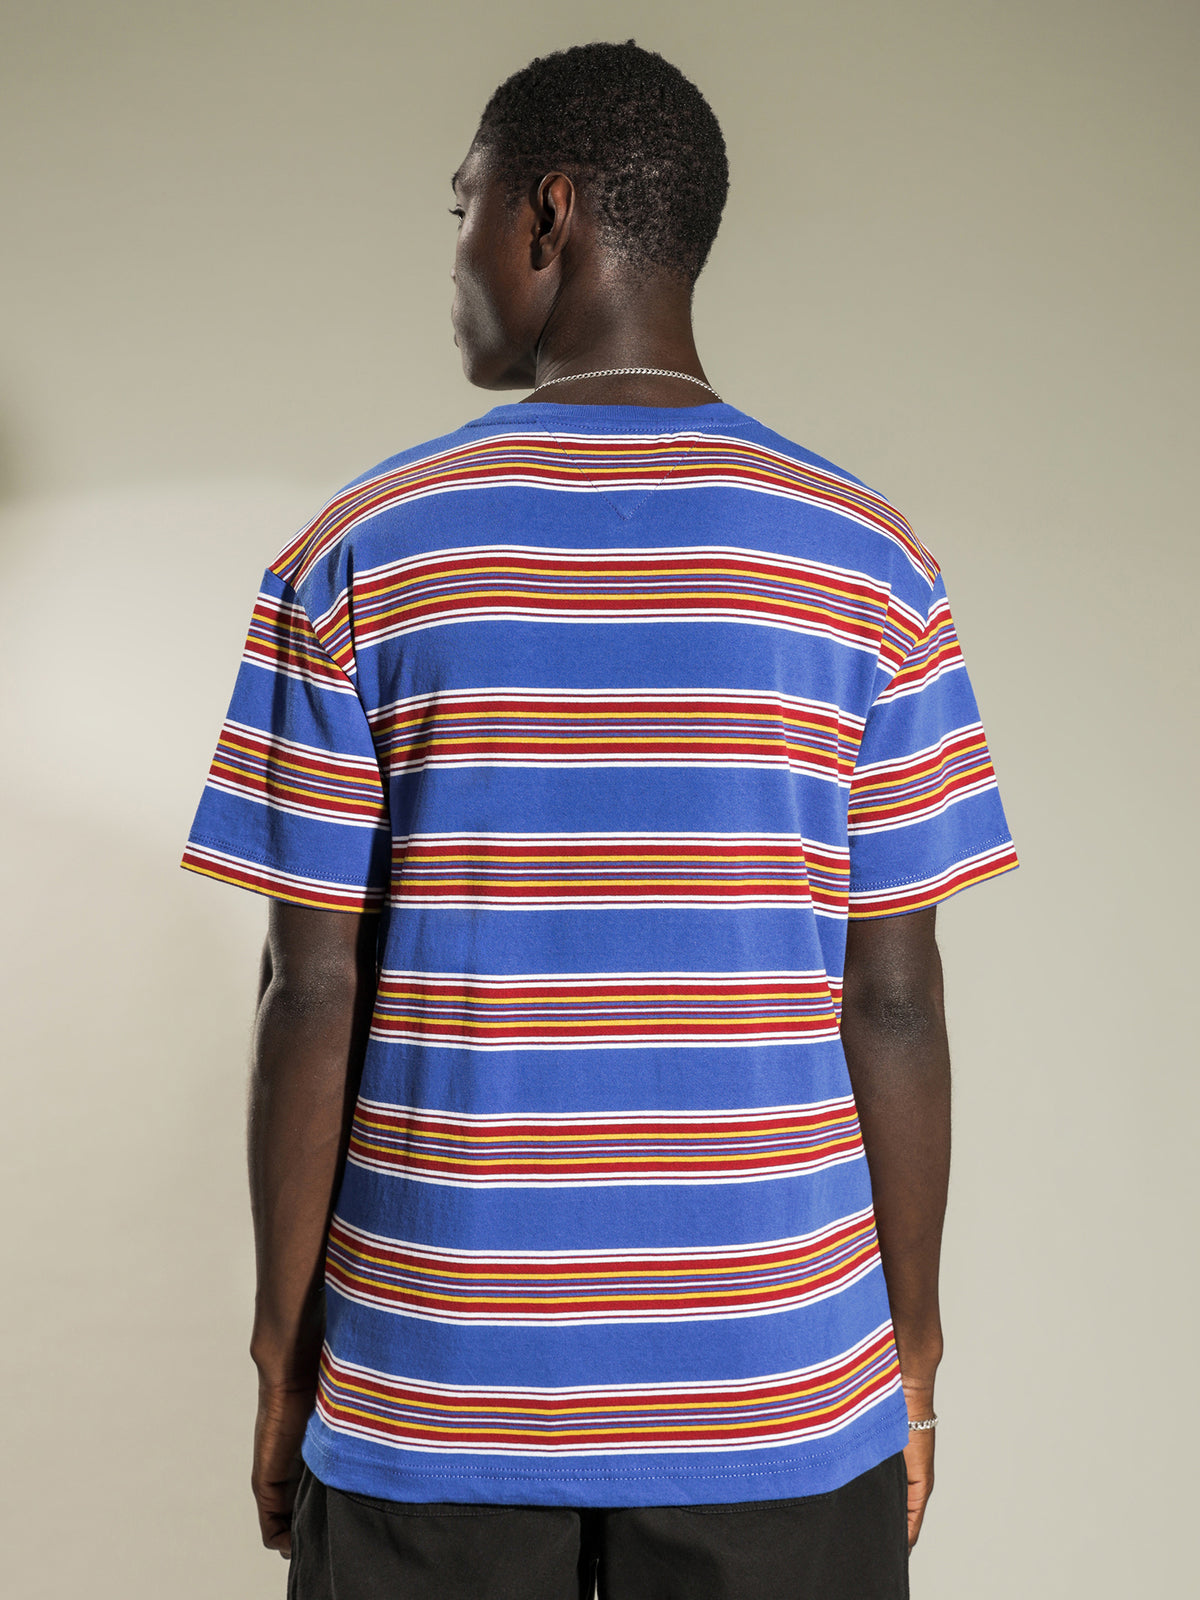 Stripe Layout T-Shirt in Providence Blue